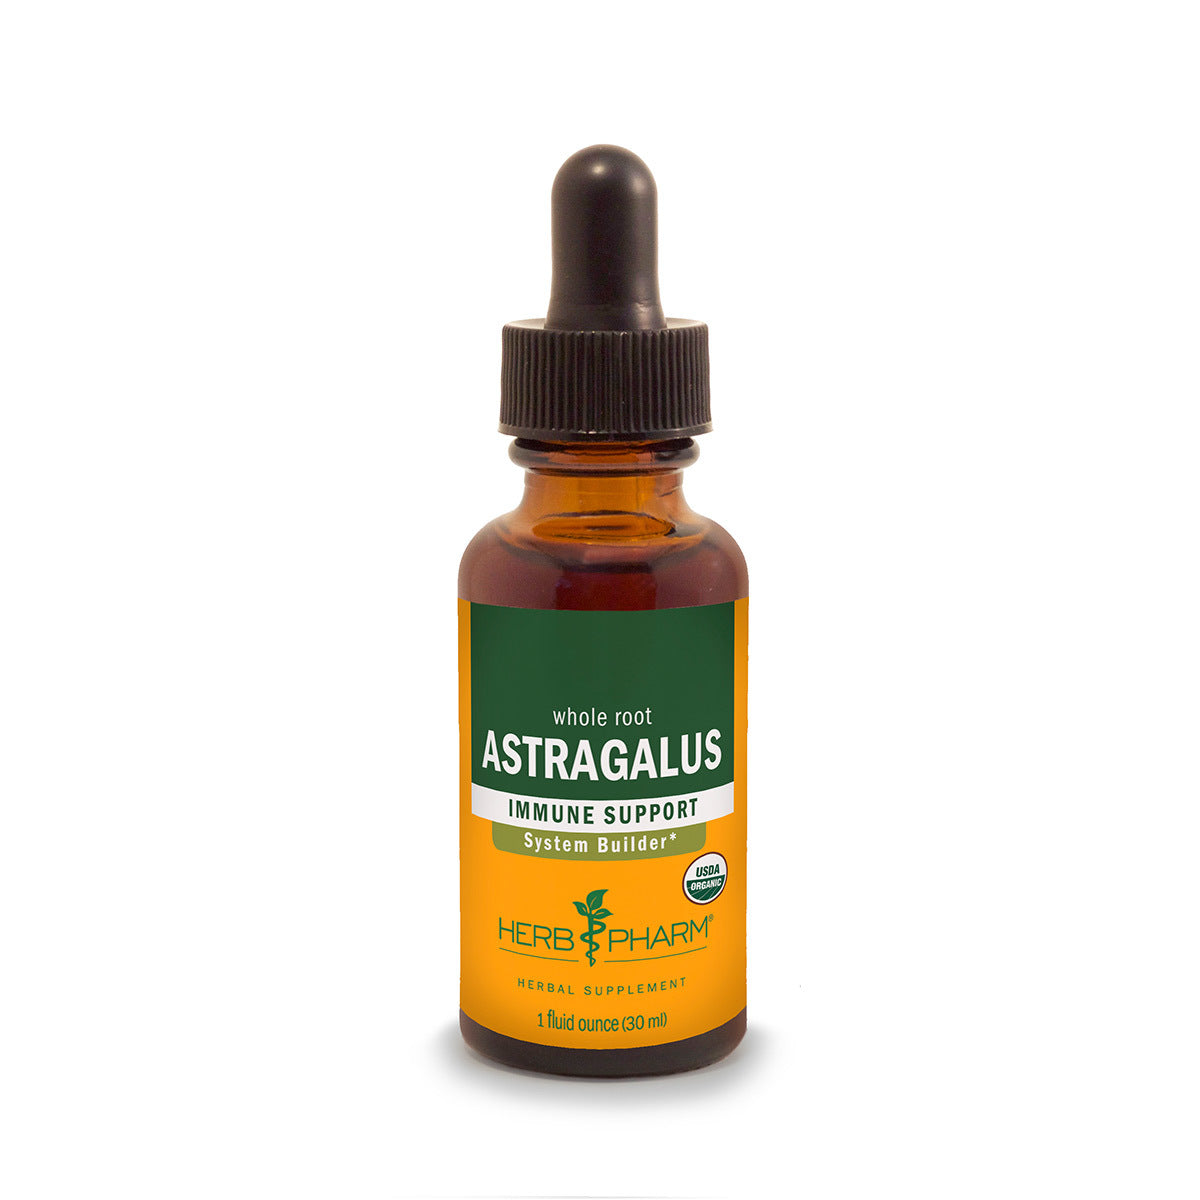 Primary image of Astragalus Extract